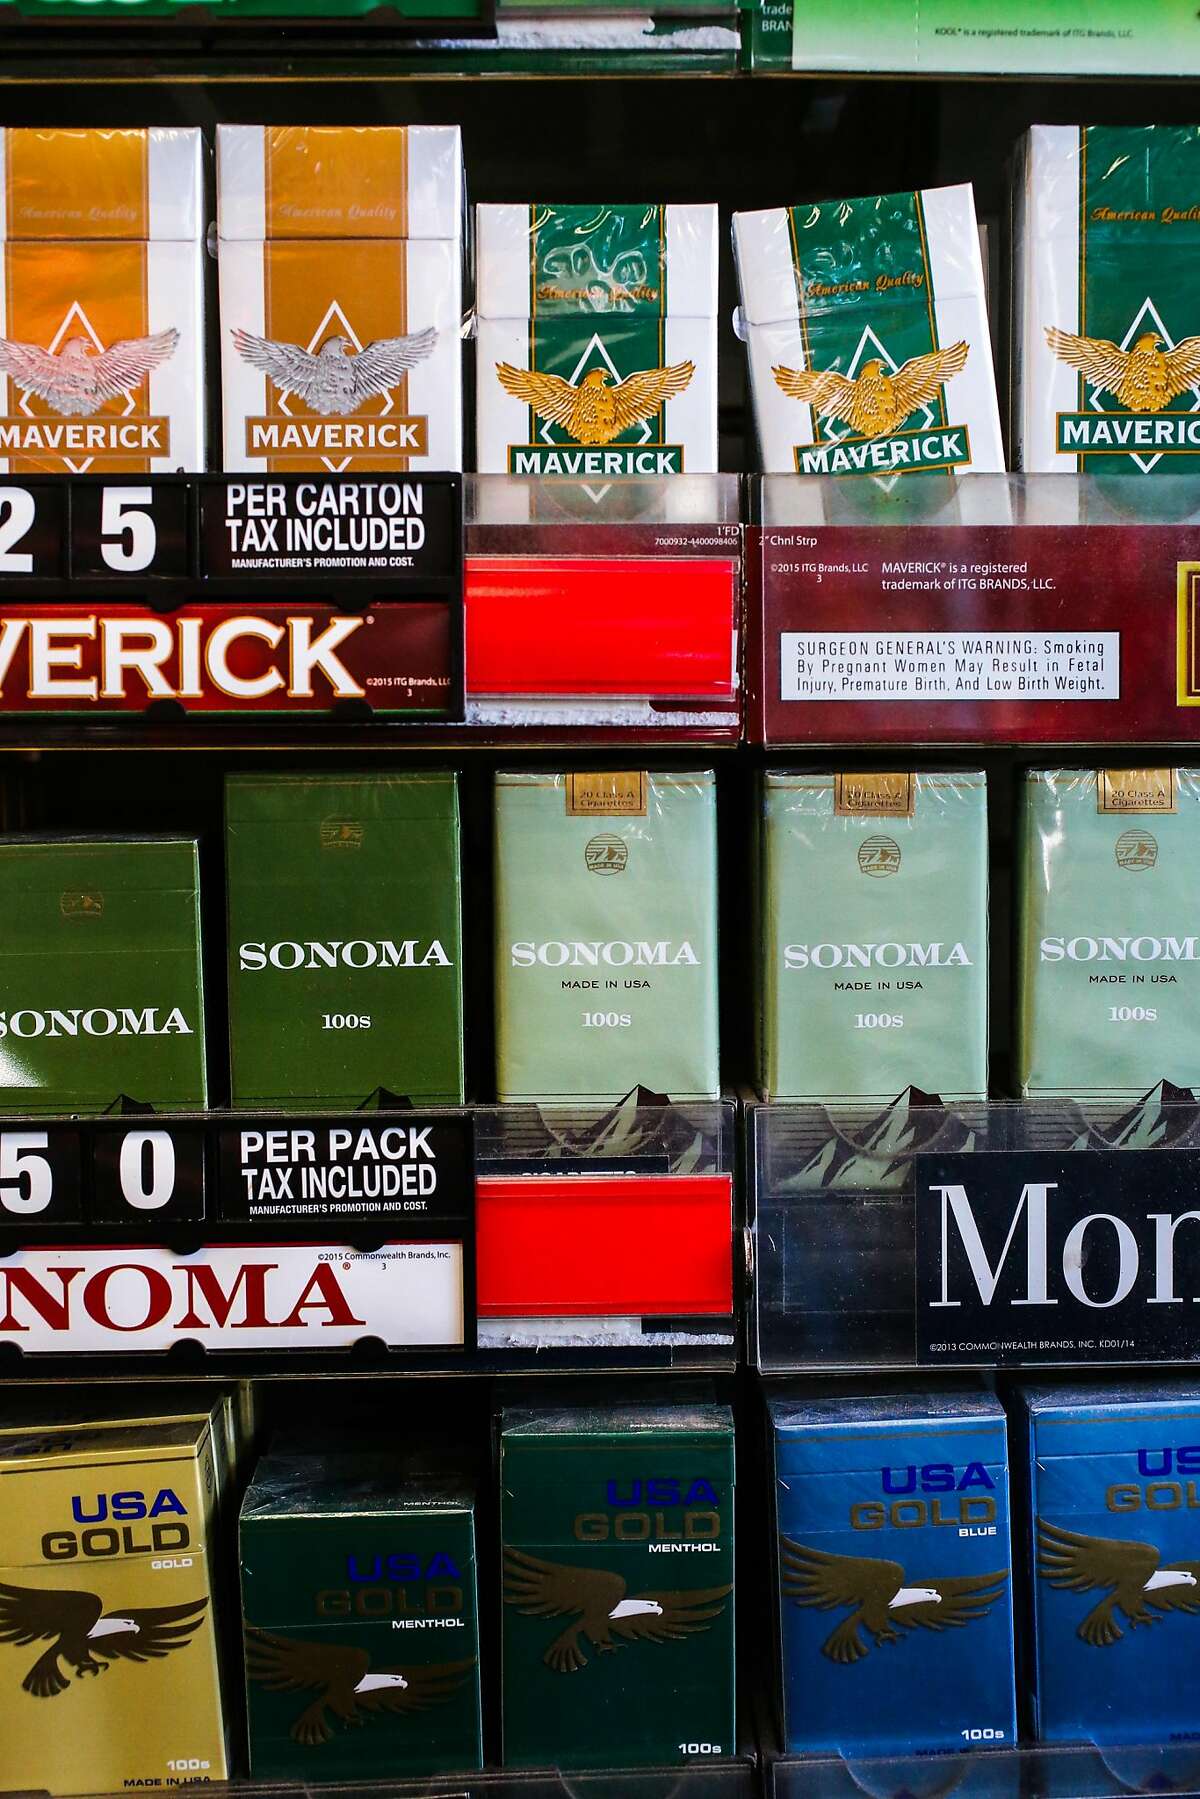 Tobacco and flavored tobacco is seen on the shelves at City Smoke and Vape Shop in San Francisco, California, on Sunday, June 11, 2017.